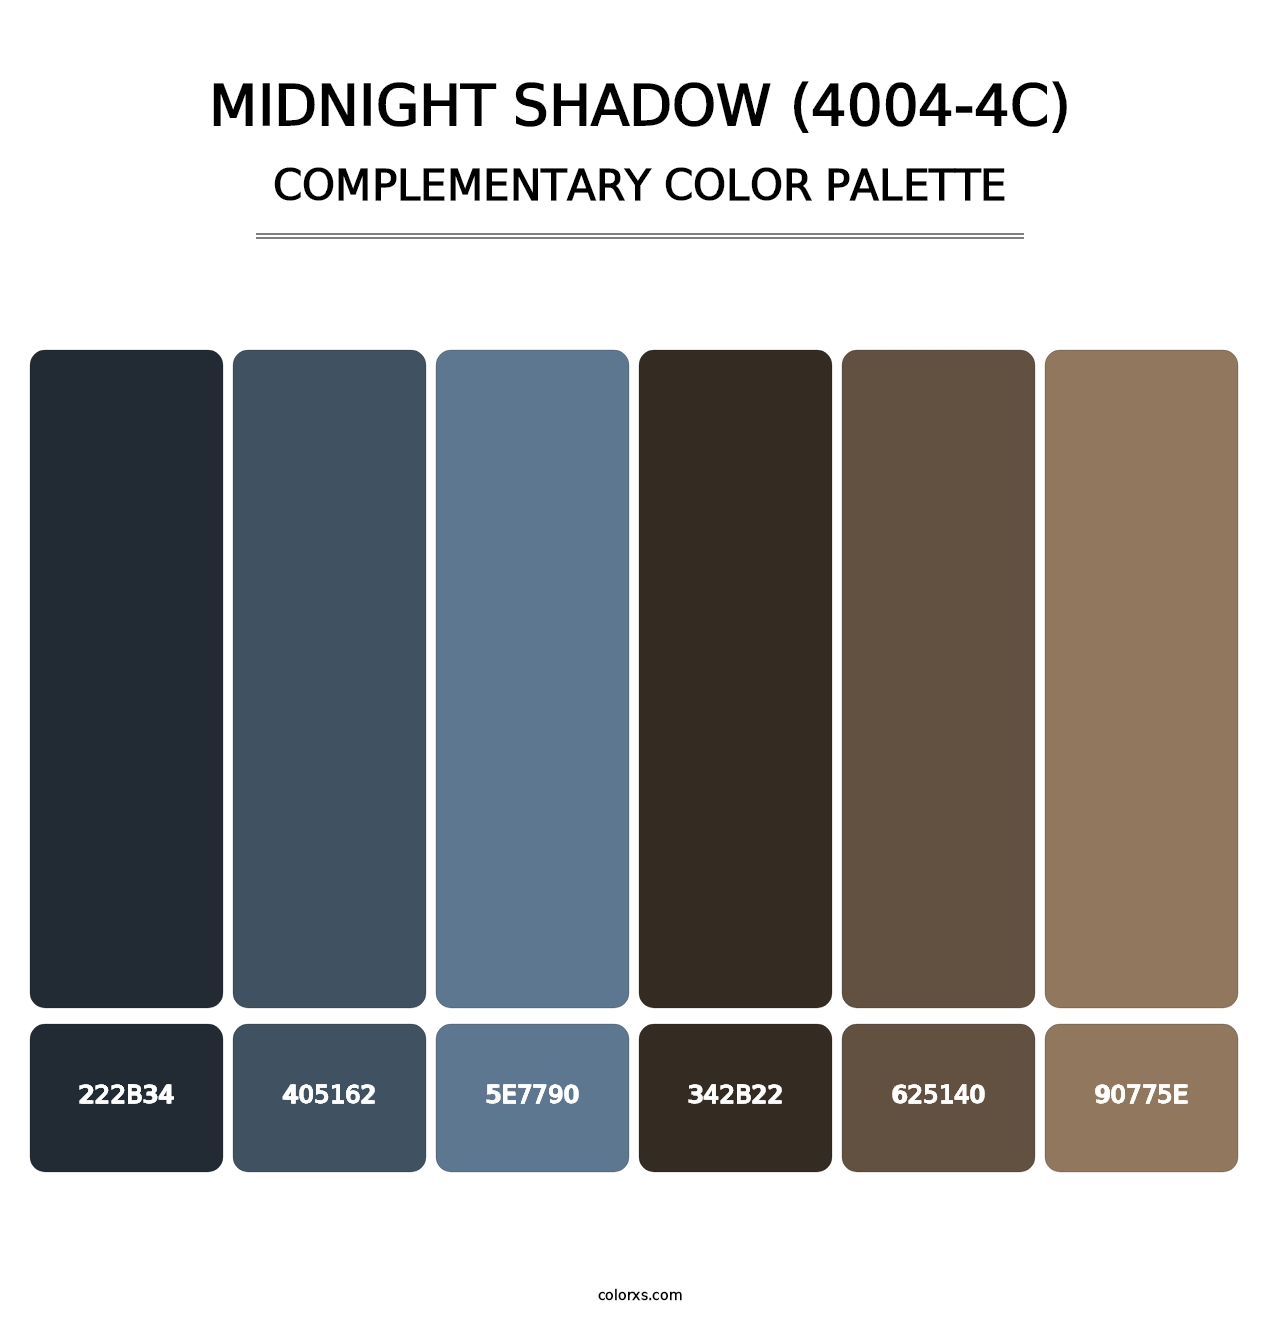 Midnight Shadow (4004-4C) - Complementary Color Palette